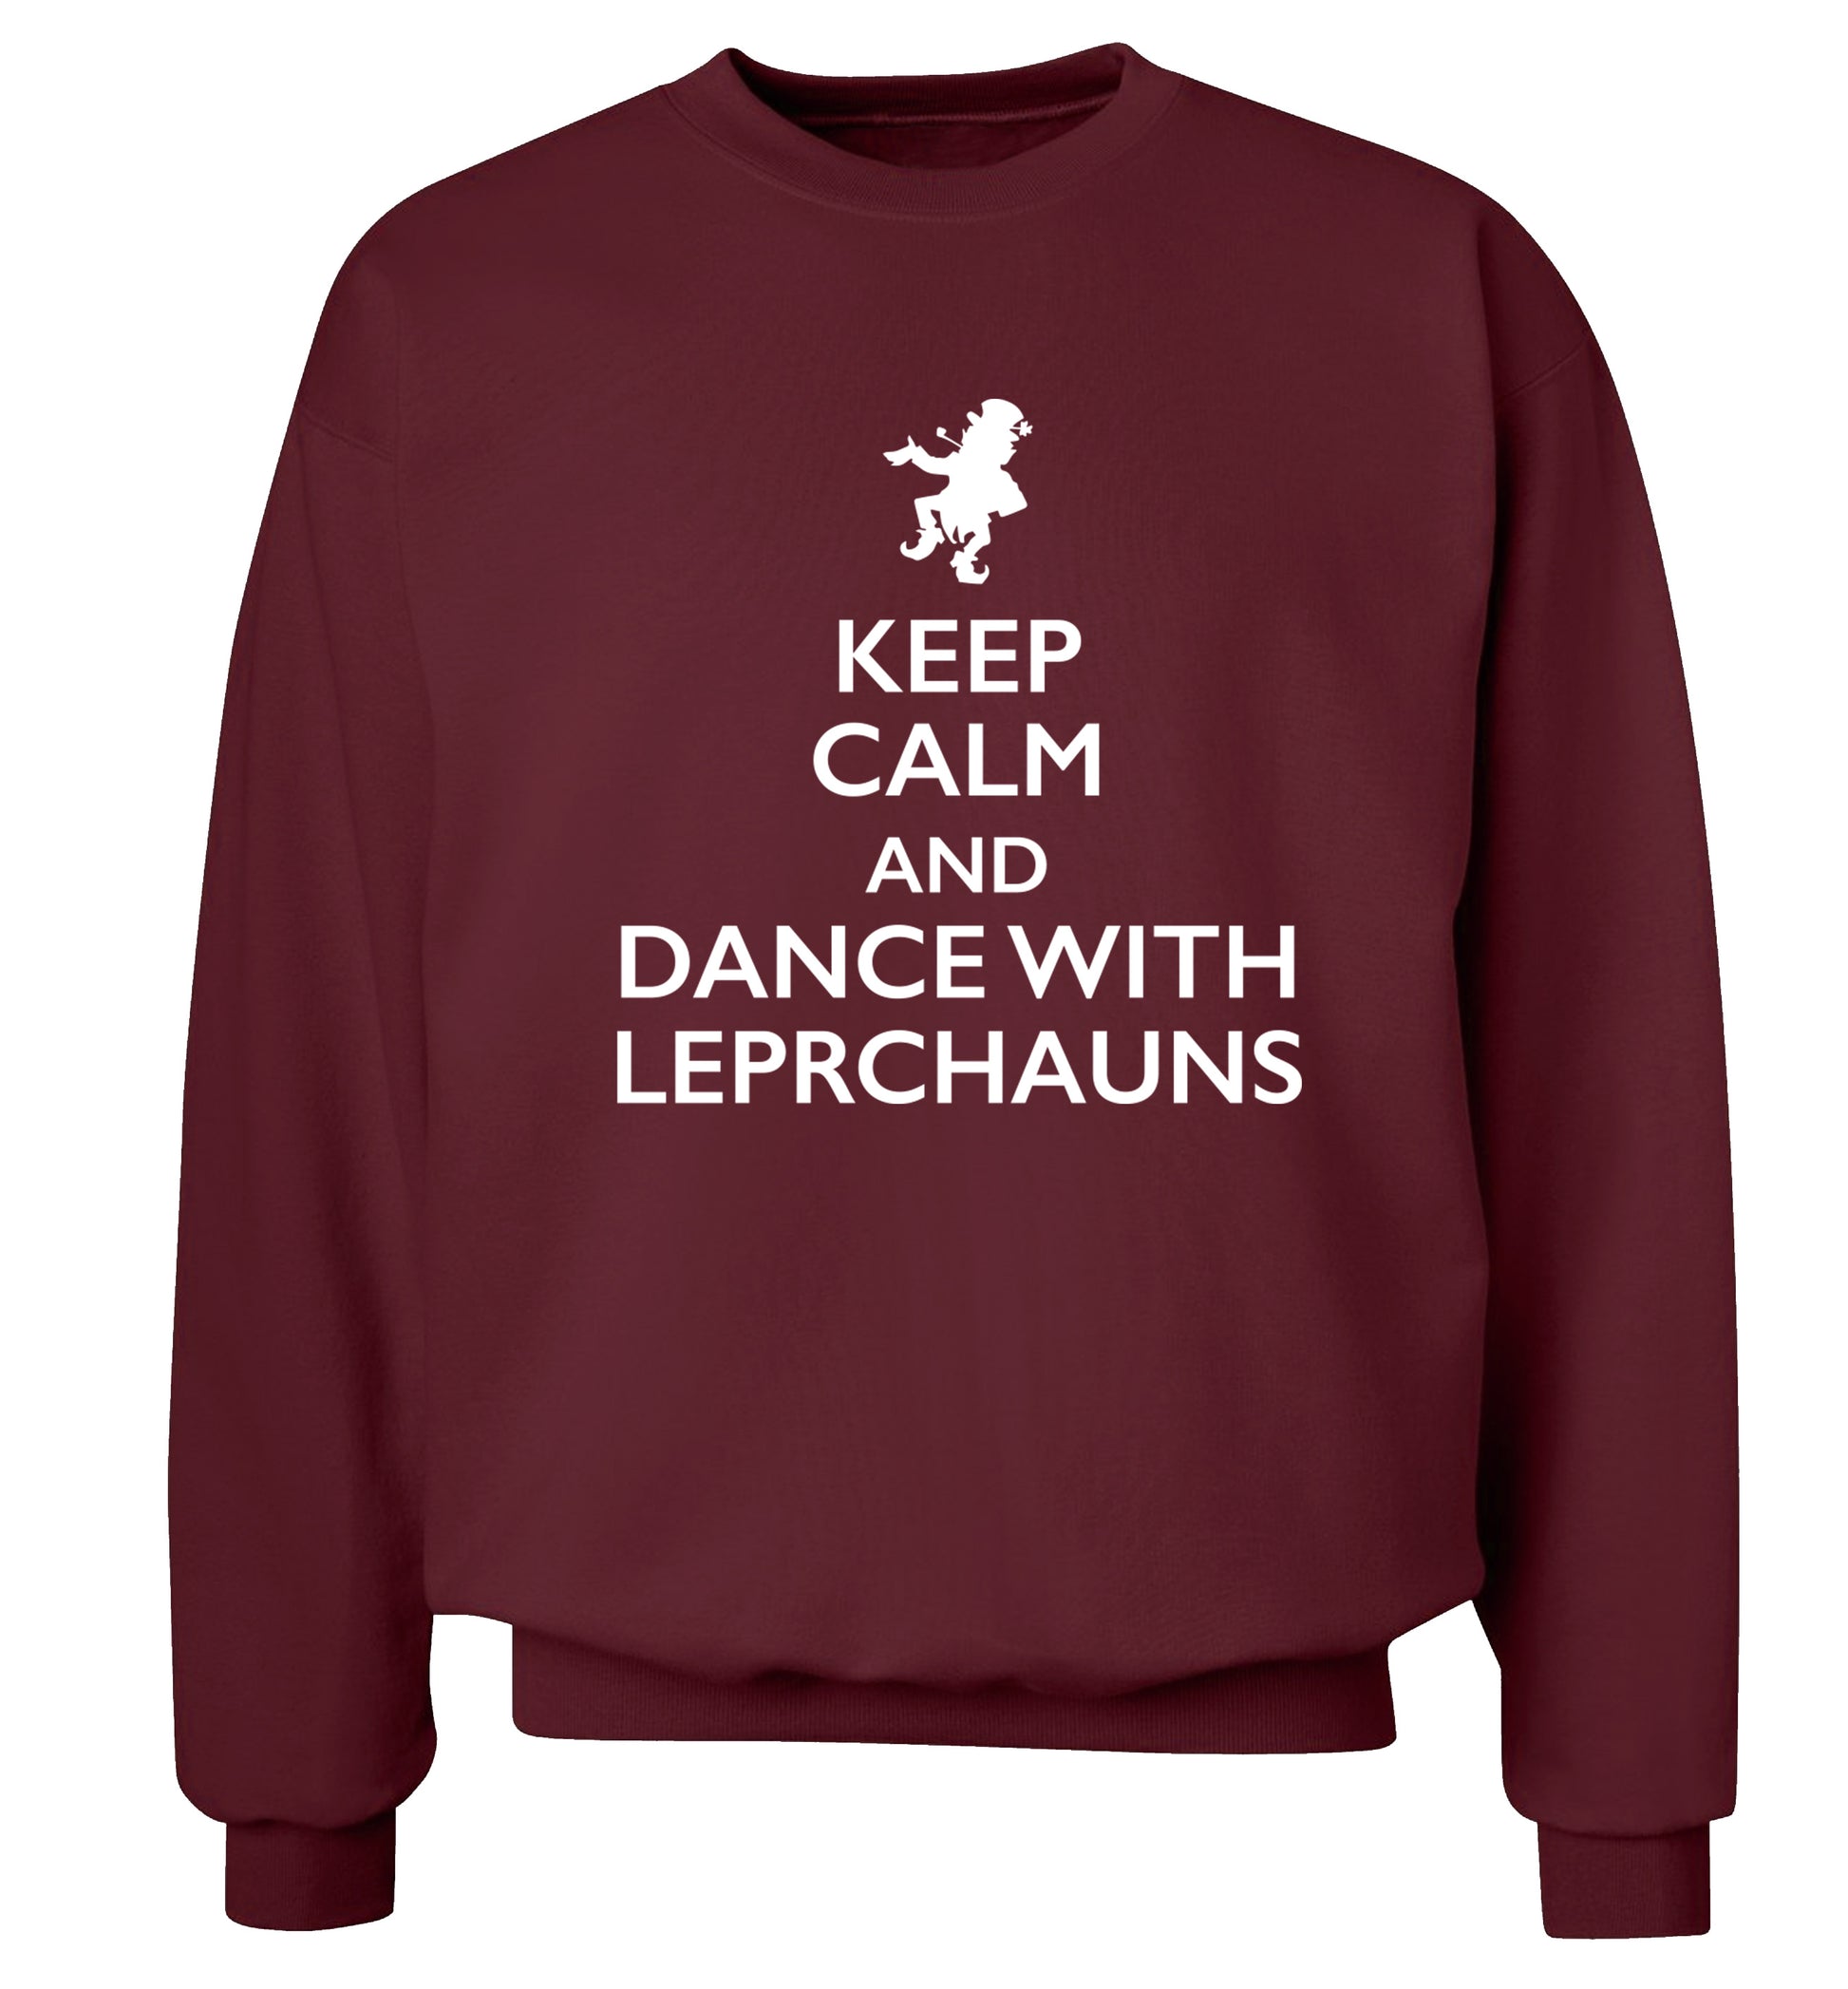 Keep calm and dance with leprechauns Adult's unisex maroon Sweater 2XL